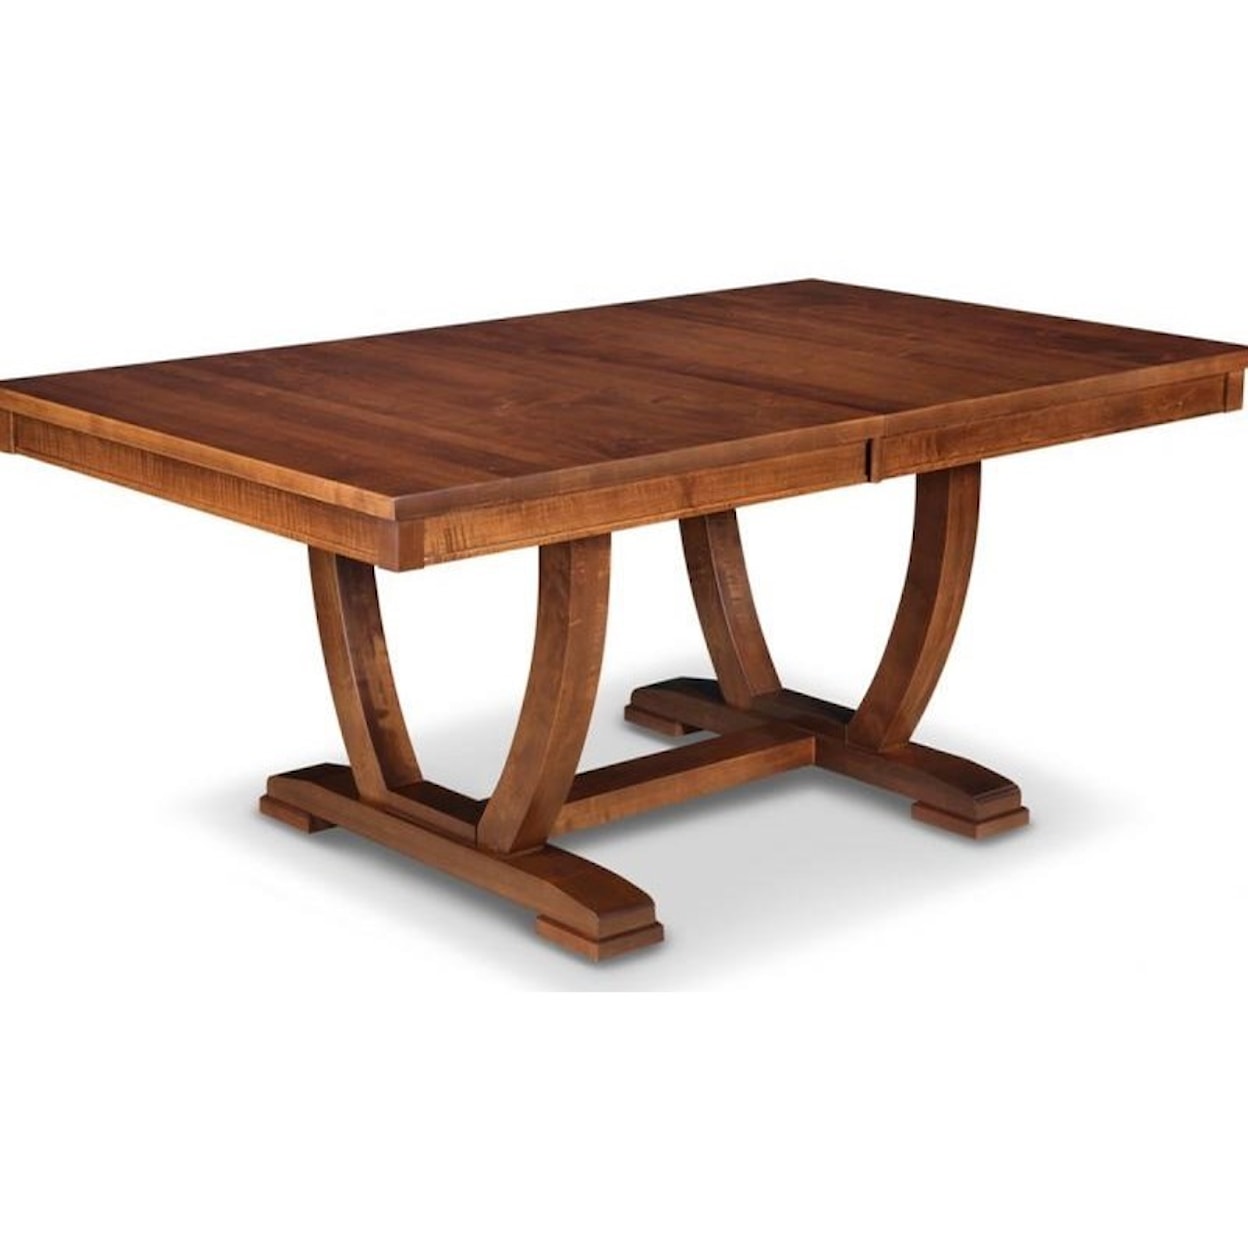 Handstone Florence 42x84" Solid Top Trestle Dining Table